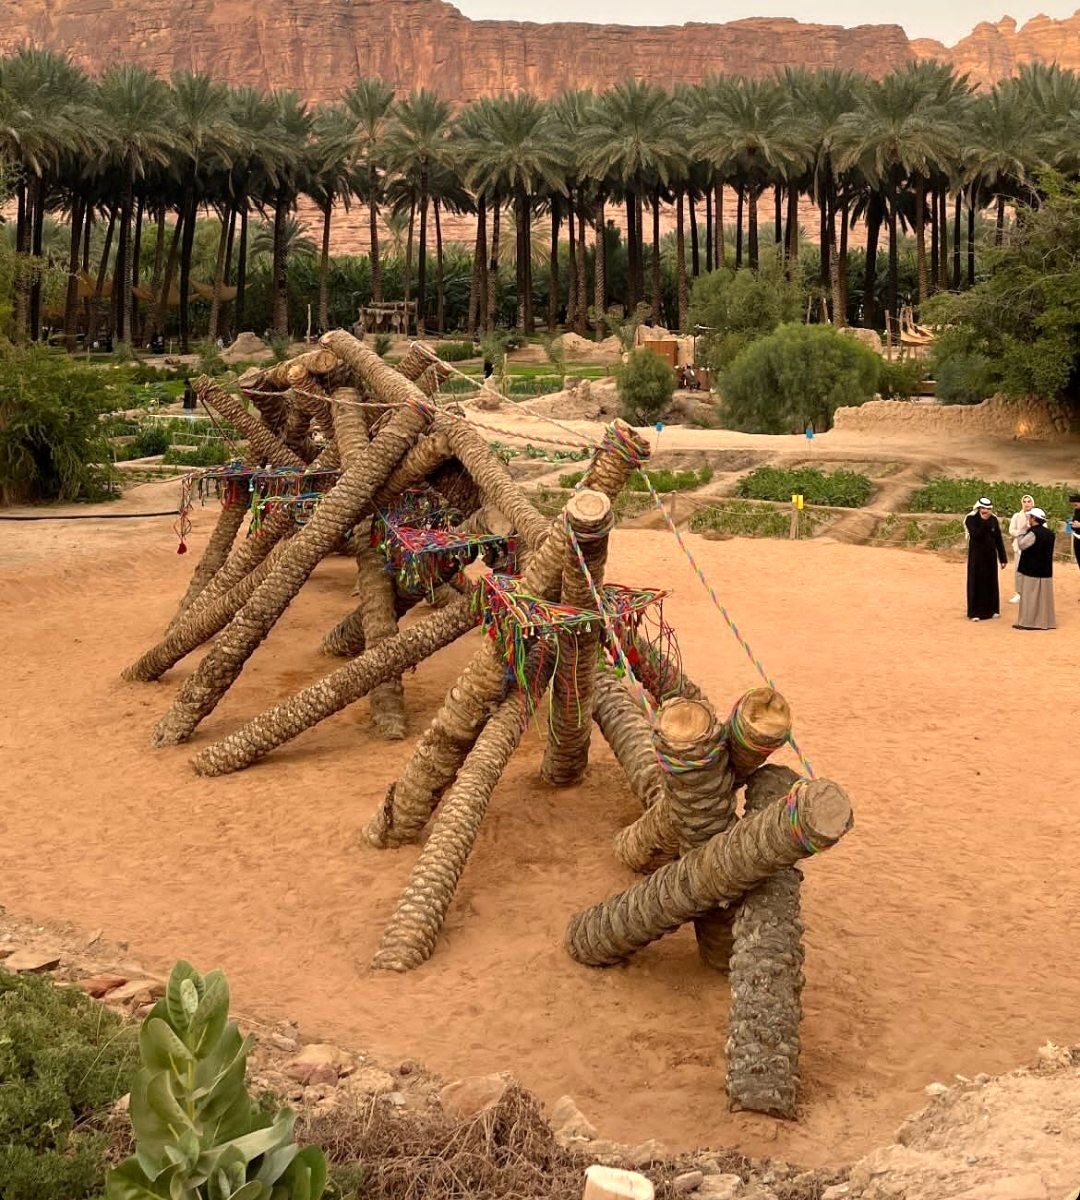 The Ithra Art Prize-winning artwork “Palms in Eternal Embrace” by Obaid Alsafi was unveiled at AlUla Arts Festival